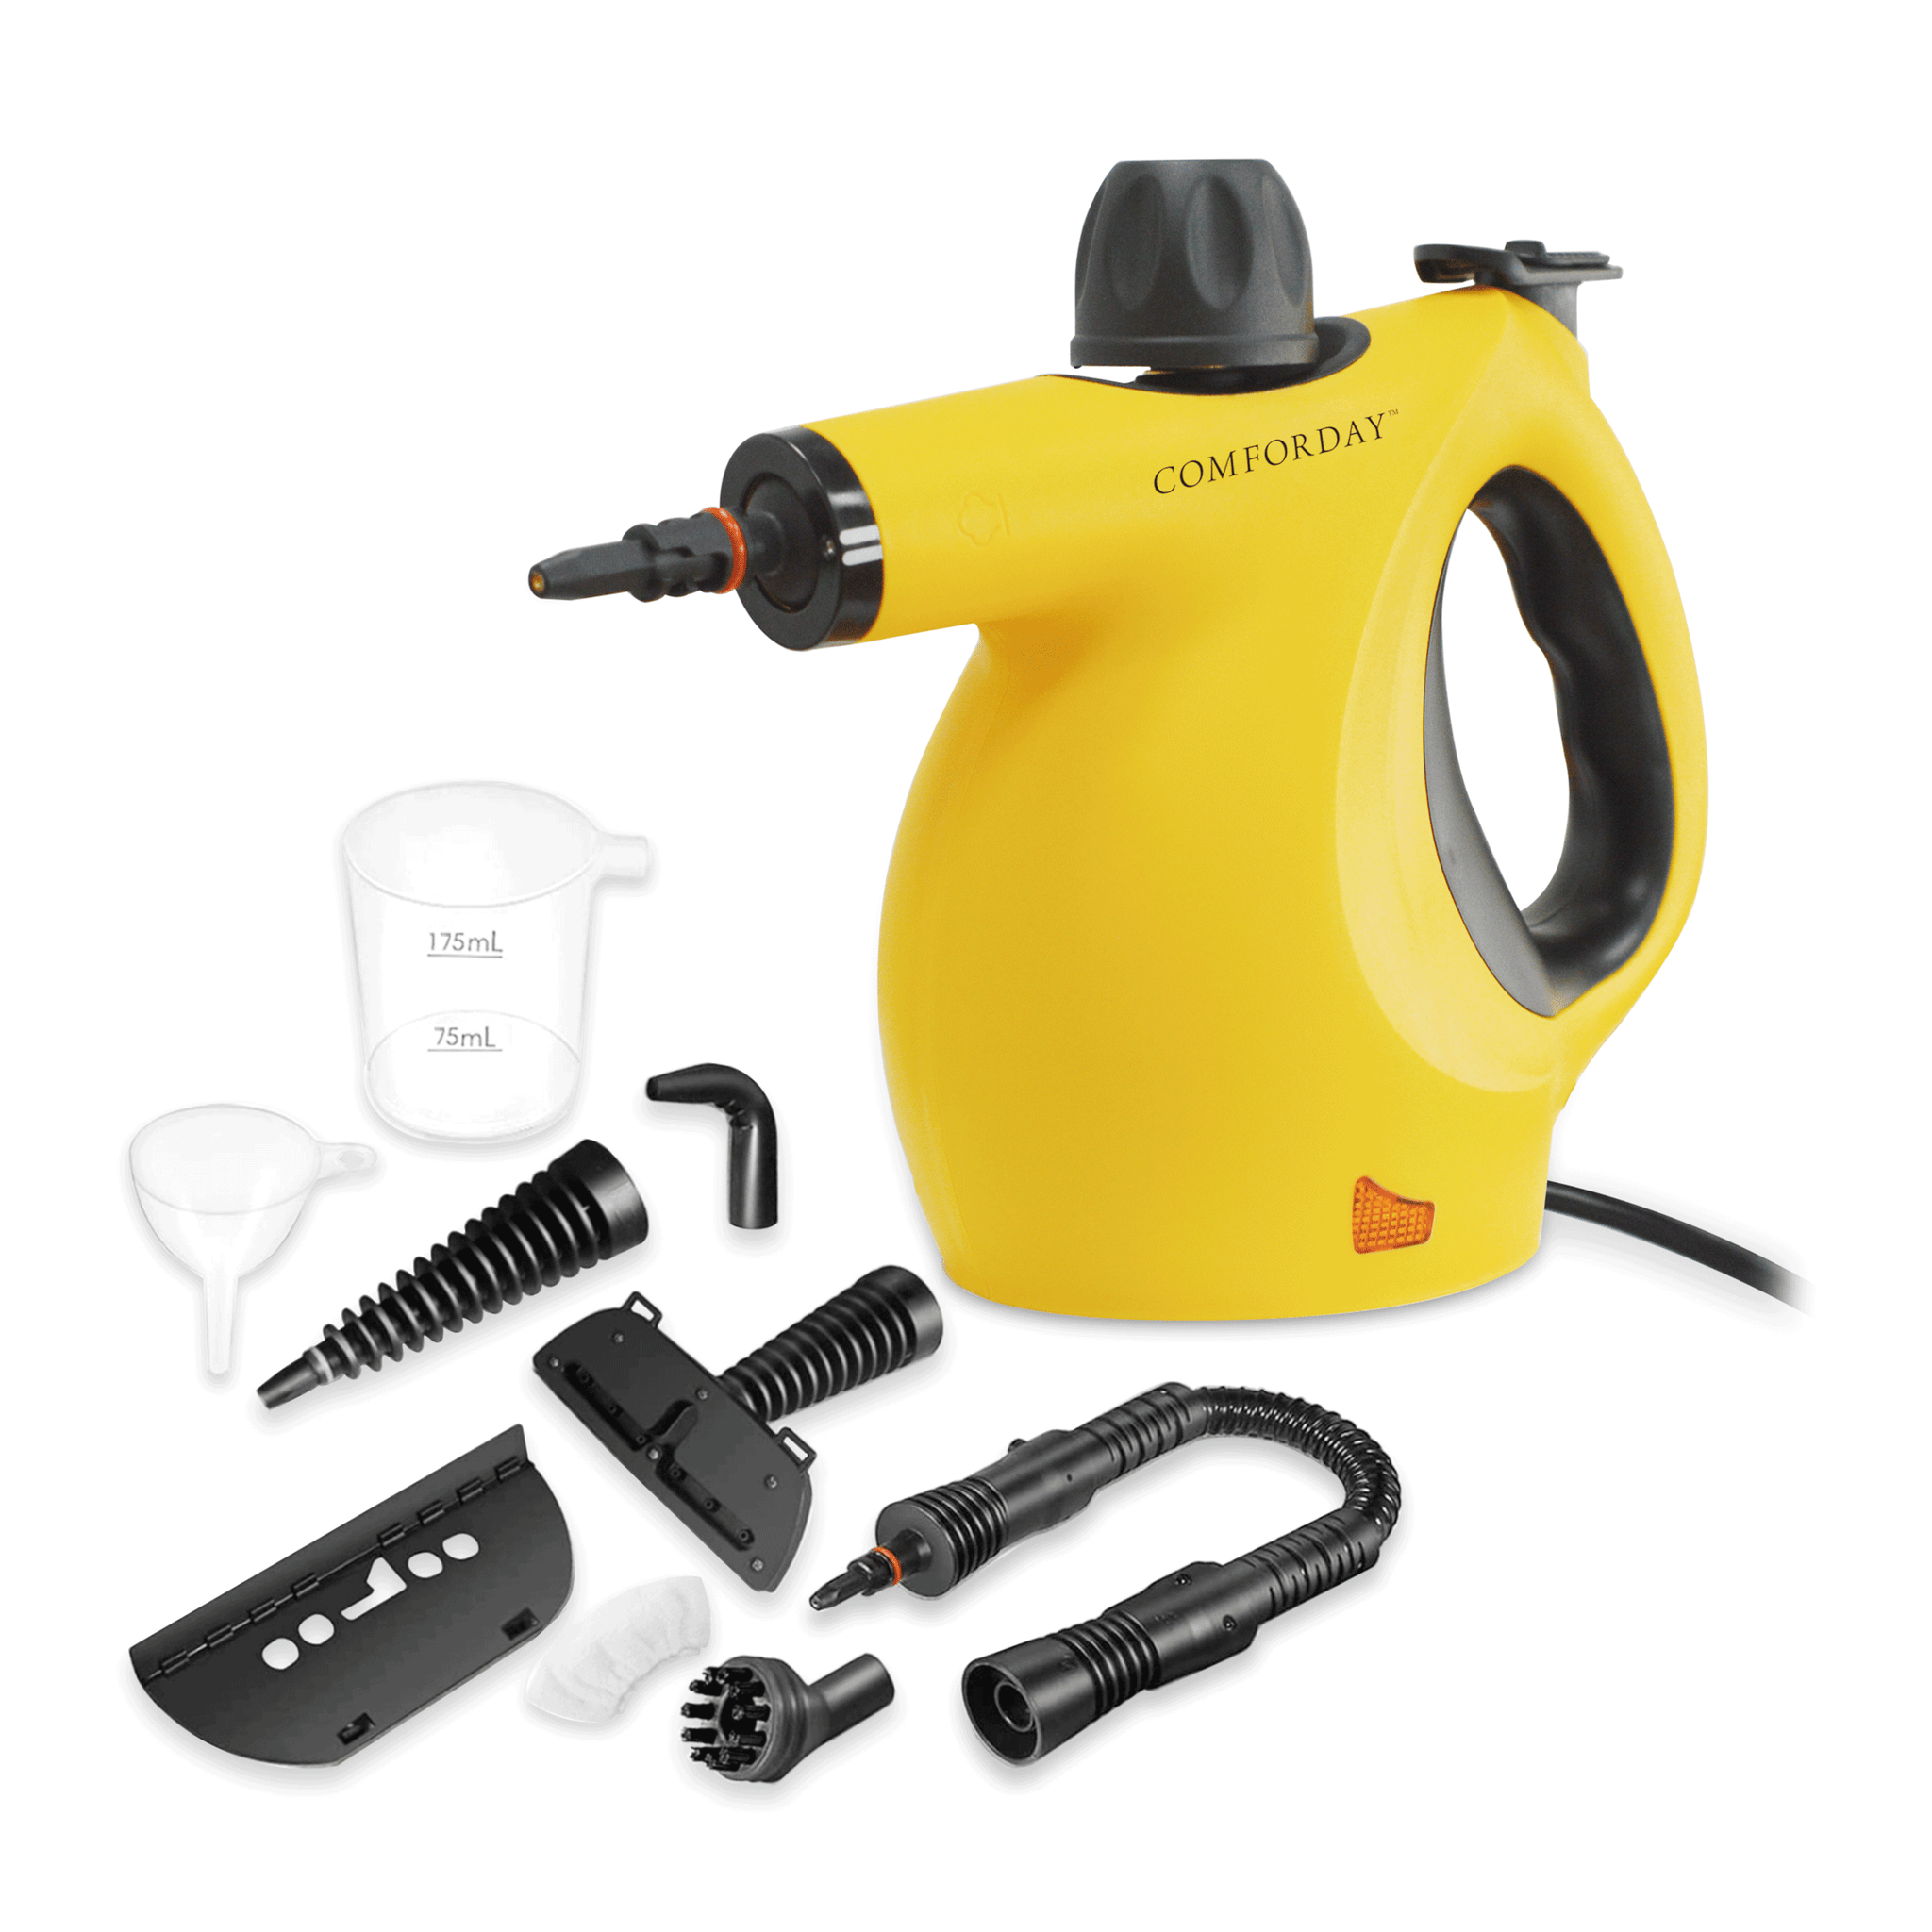 Comforday Multi-Purpose Handheld Pressurized Steam Cleaner with 9-Piece Accessories for Stain Removal, Steamer, Carpets, Curtains, Car Seats, Kitchen Surface & Much More (Yellow Black)